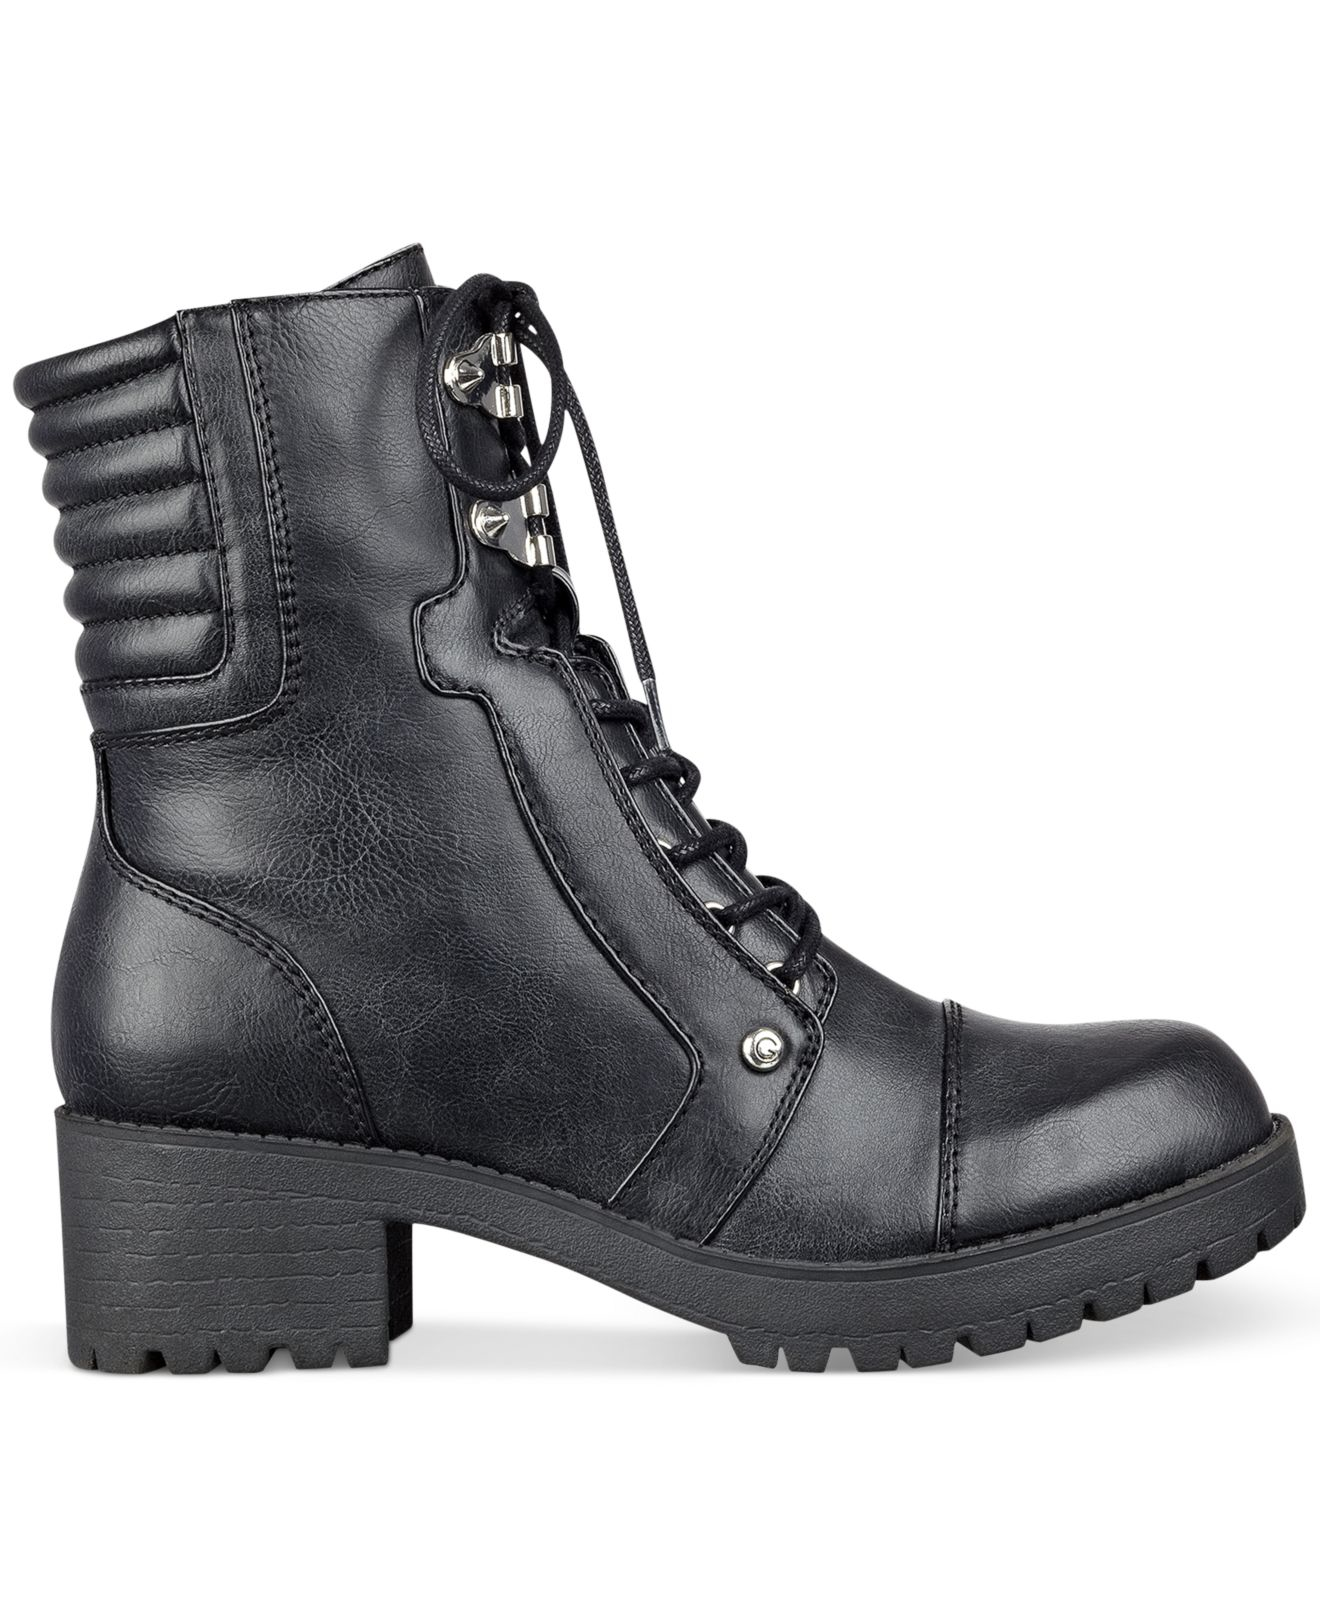 Lyst - G By Guess Meara Lace-up Moto Booties in Black